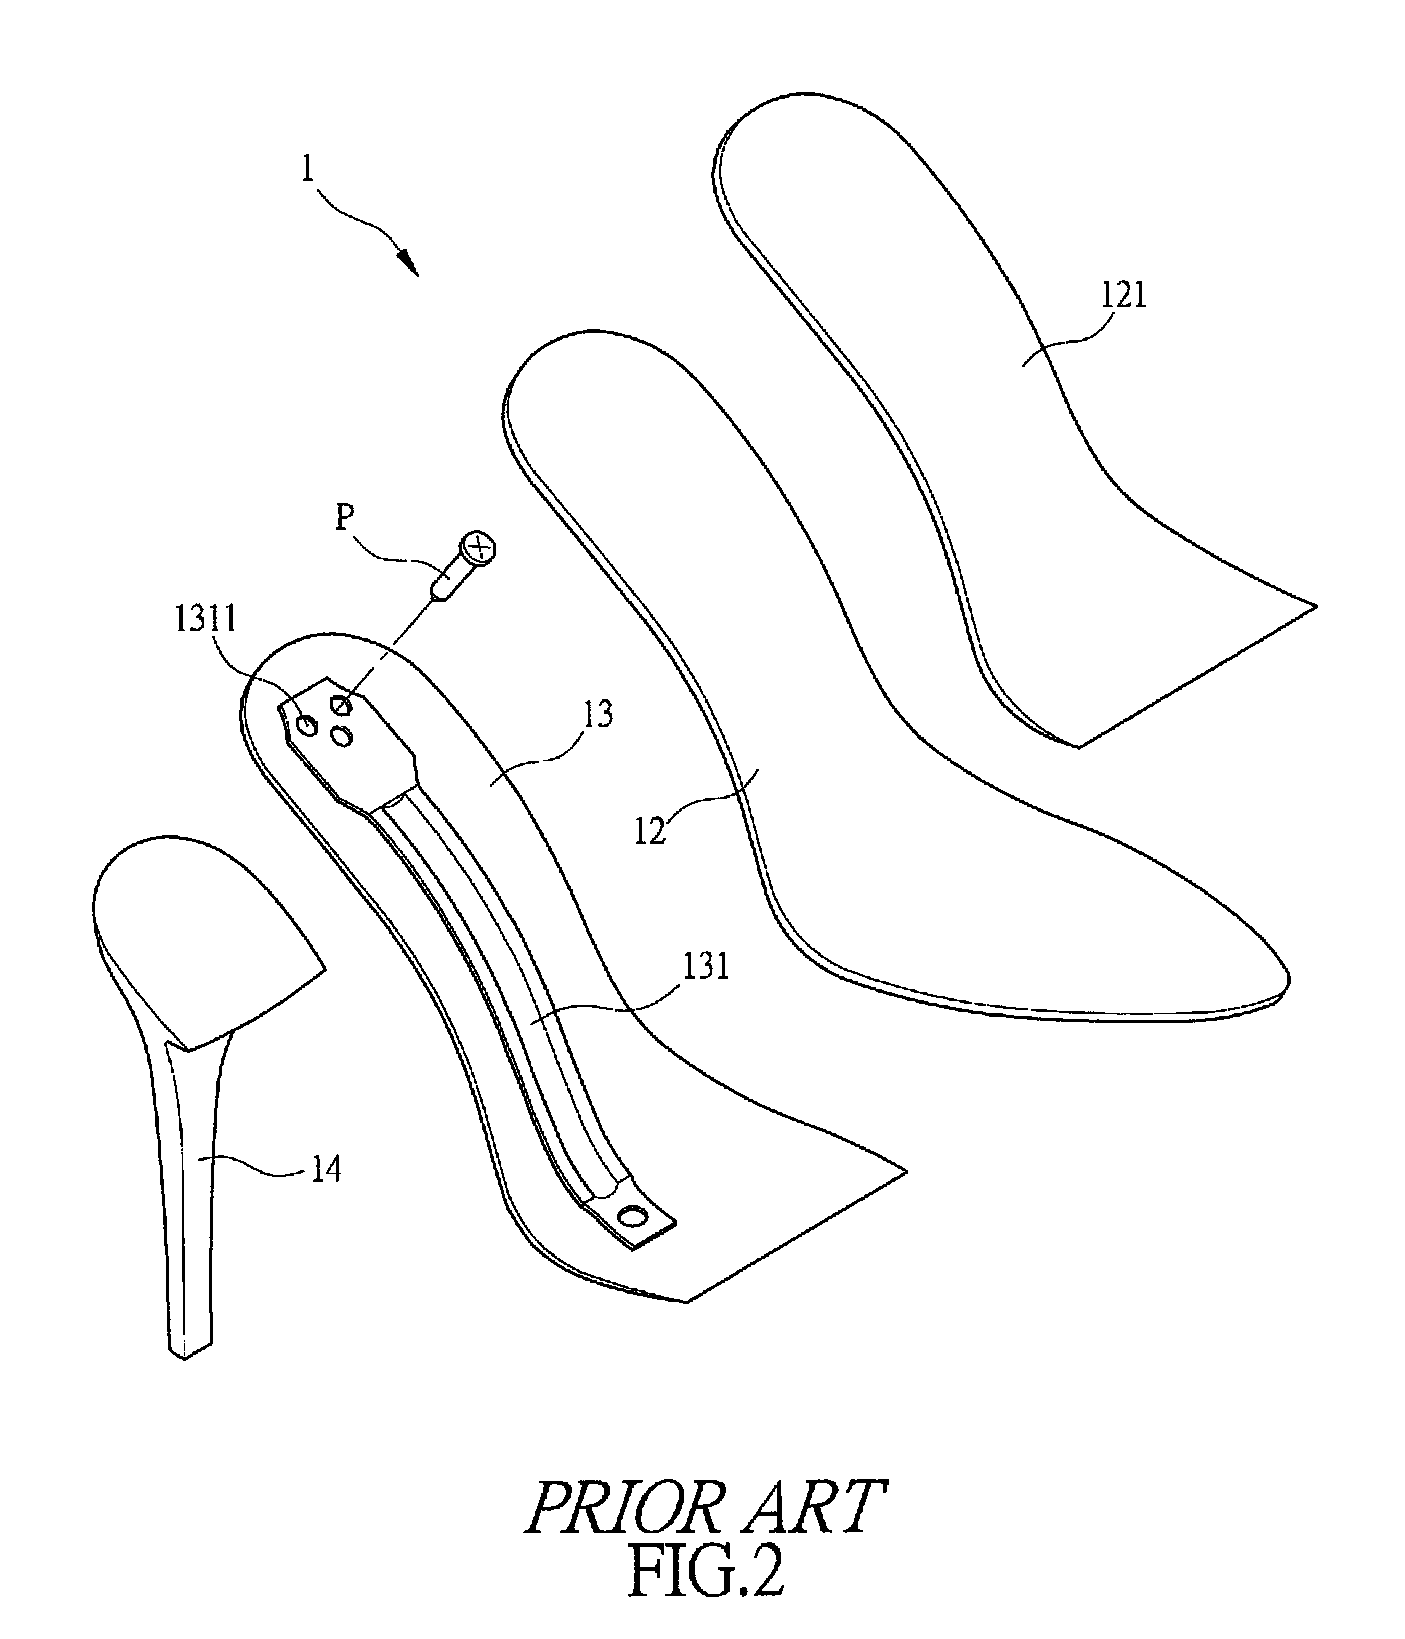 Structure of high-heeled shoe